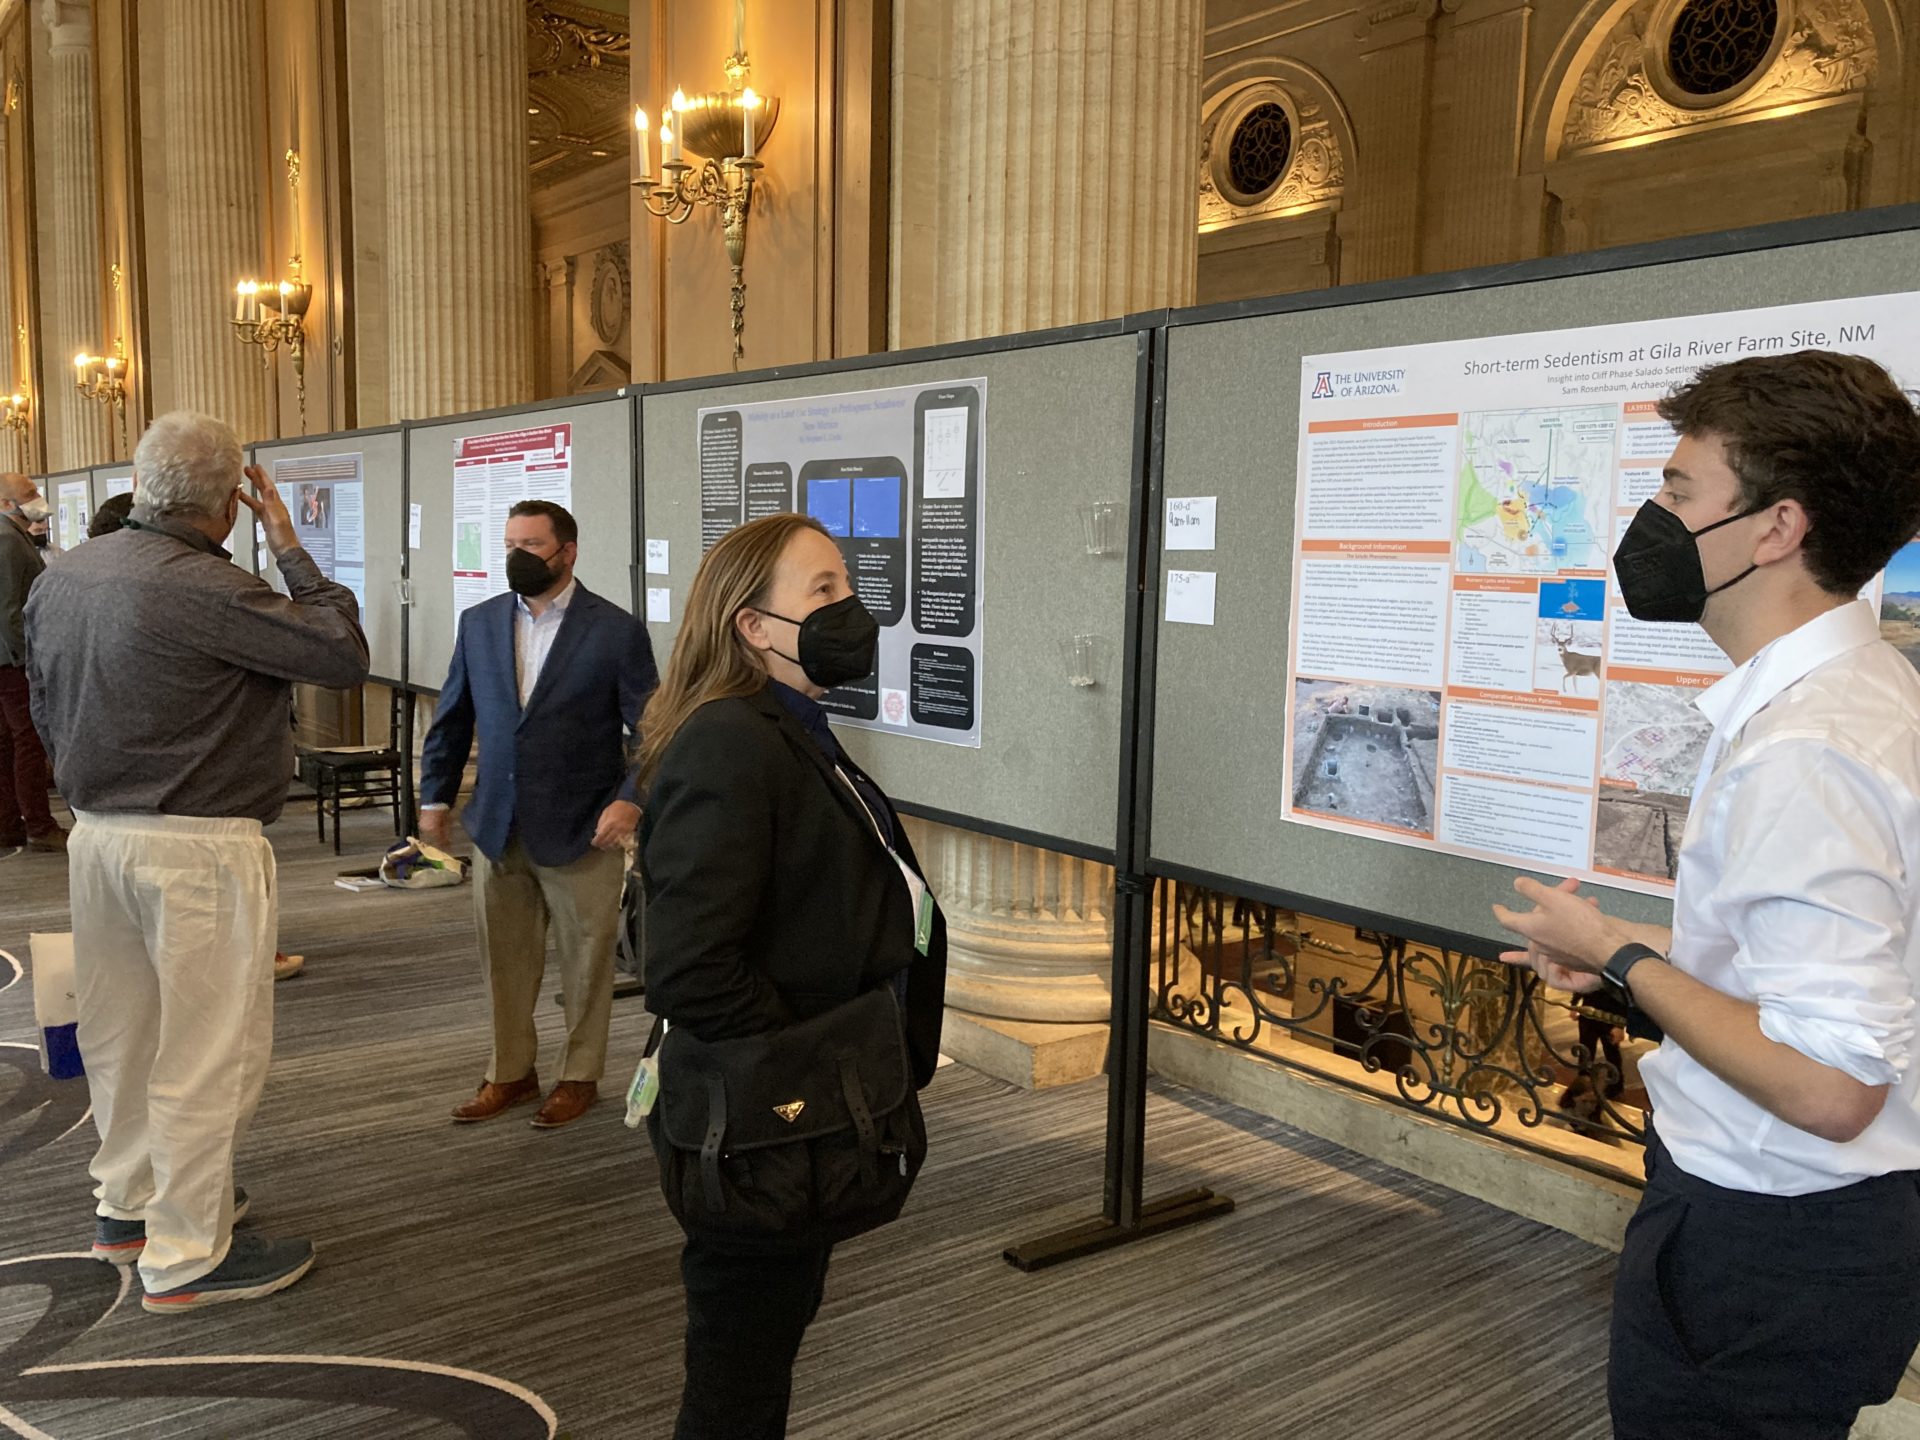 Sam Rosenbaum (right) and Stephen Uzzle (in sportcoat) discuss their research in our Mogollon area poster session.